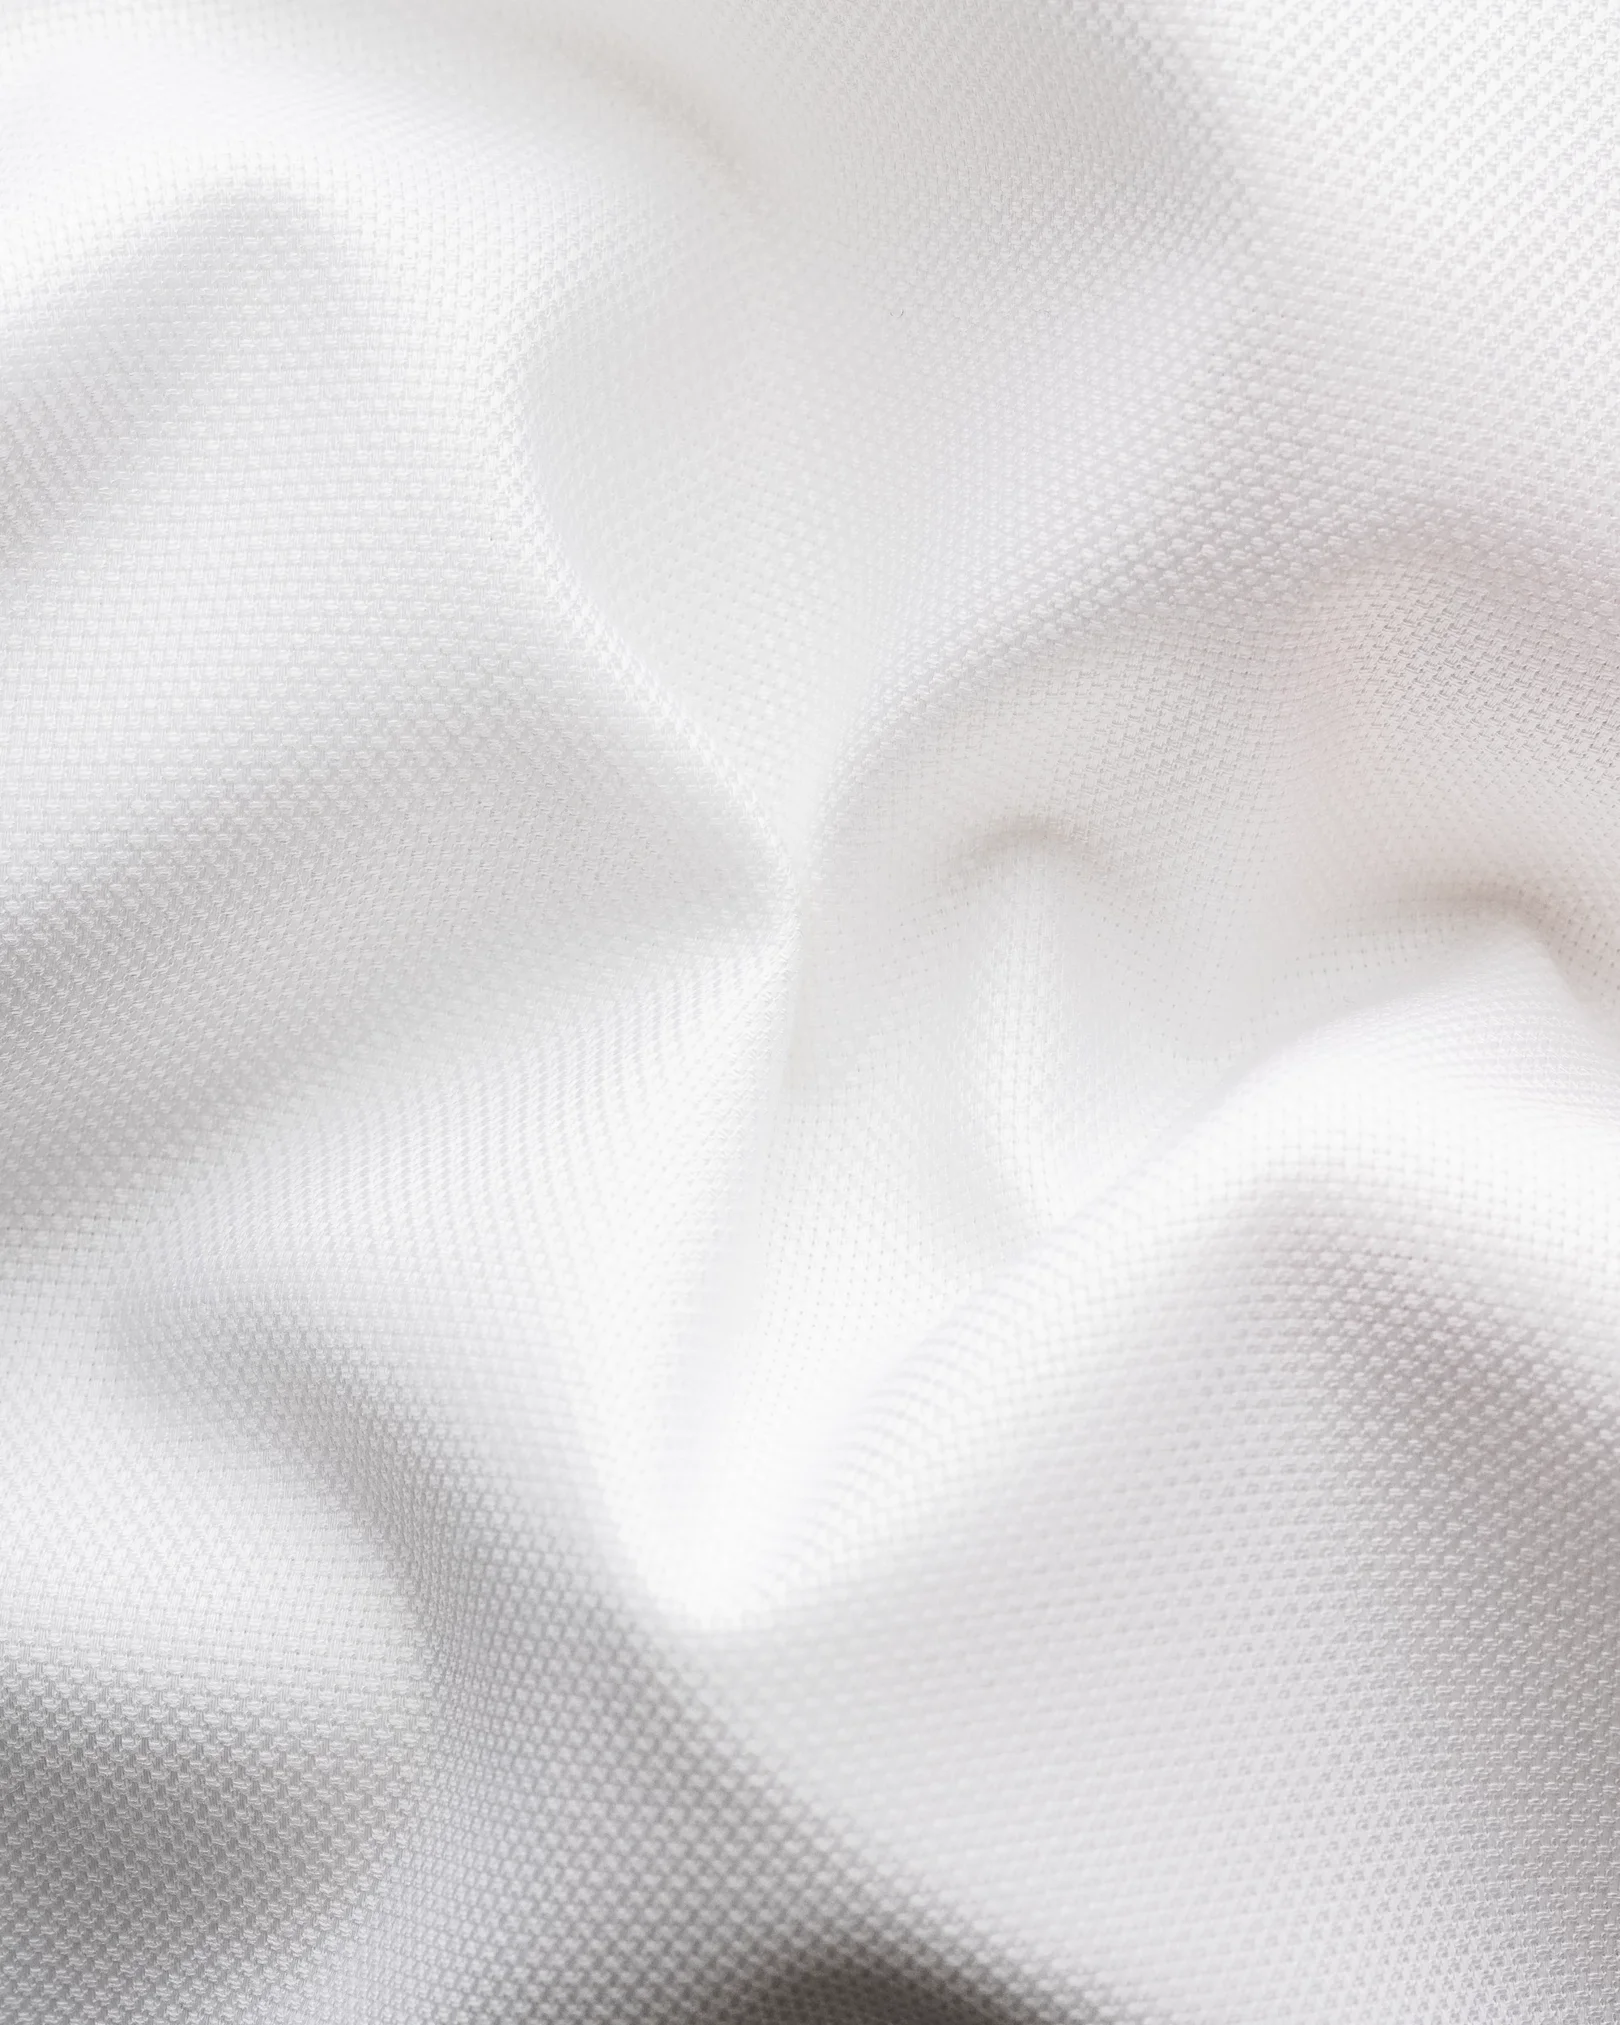 Eton - white twill shirt with special details